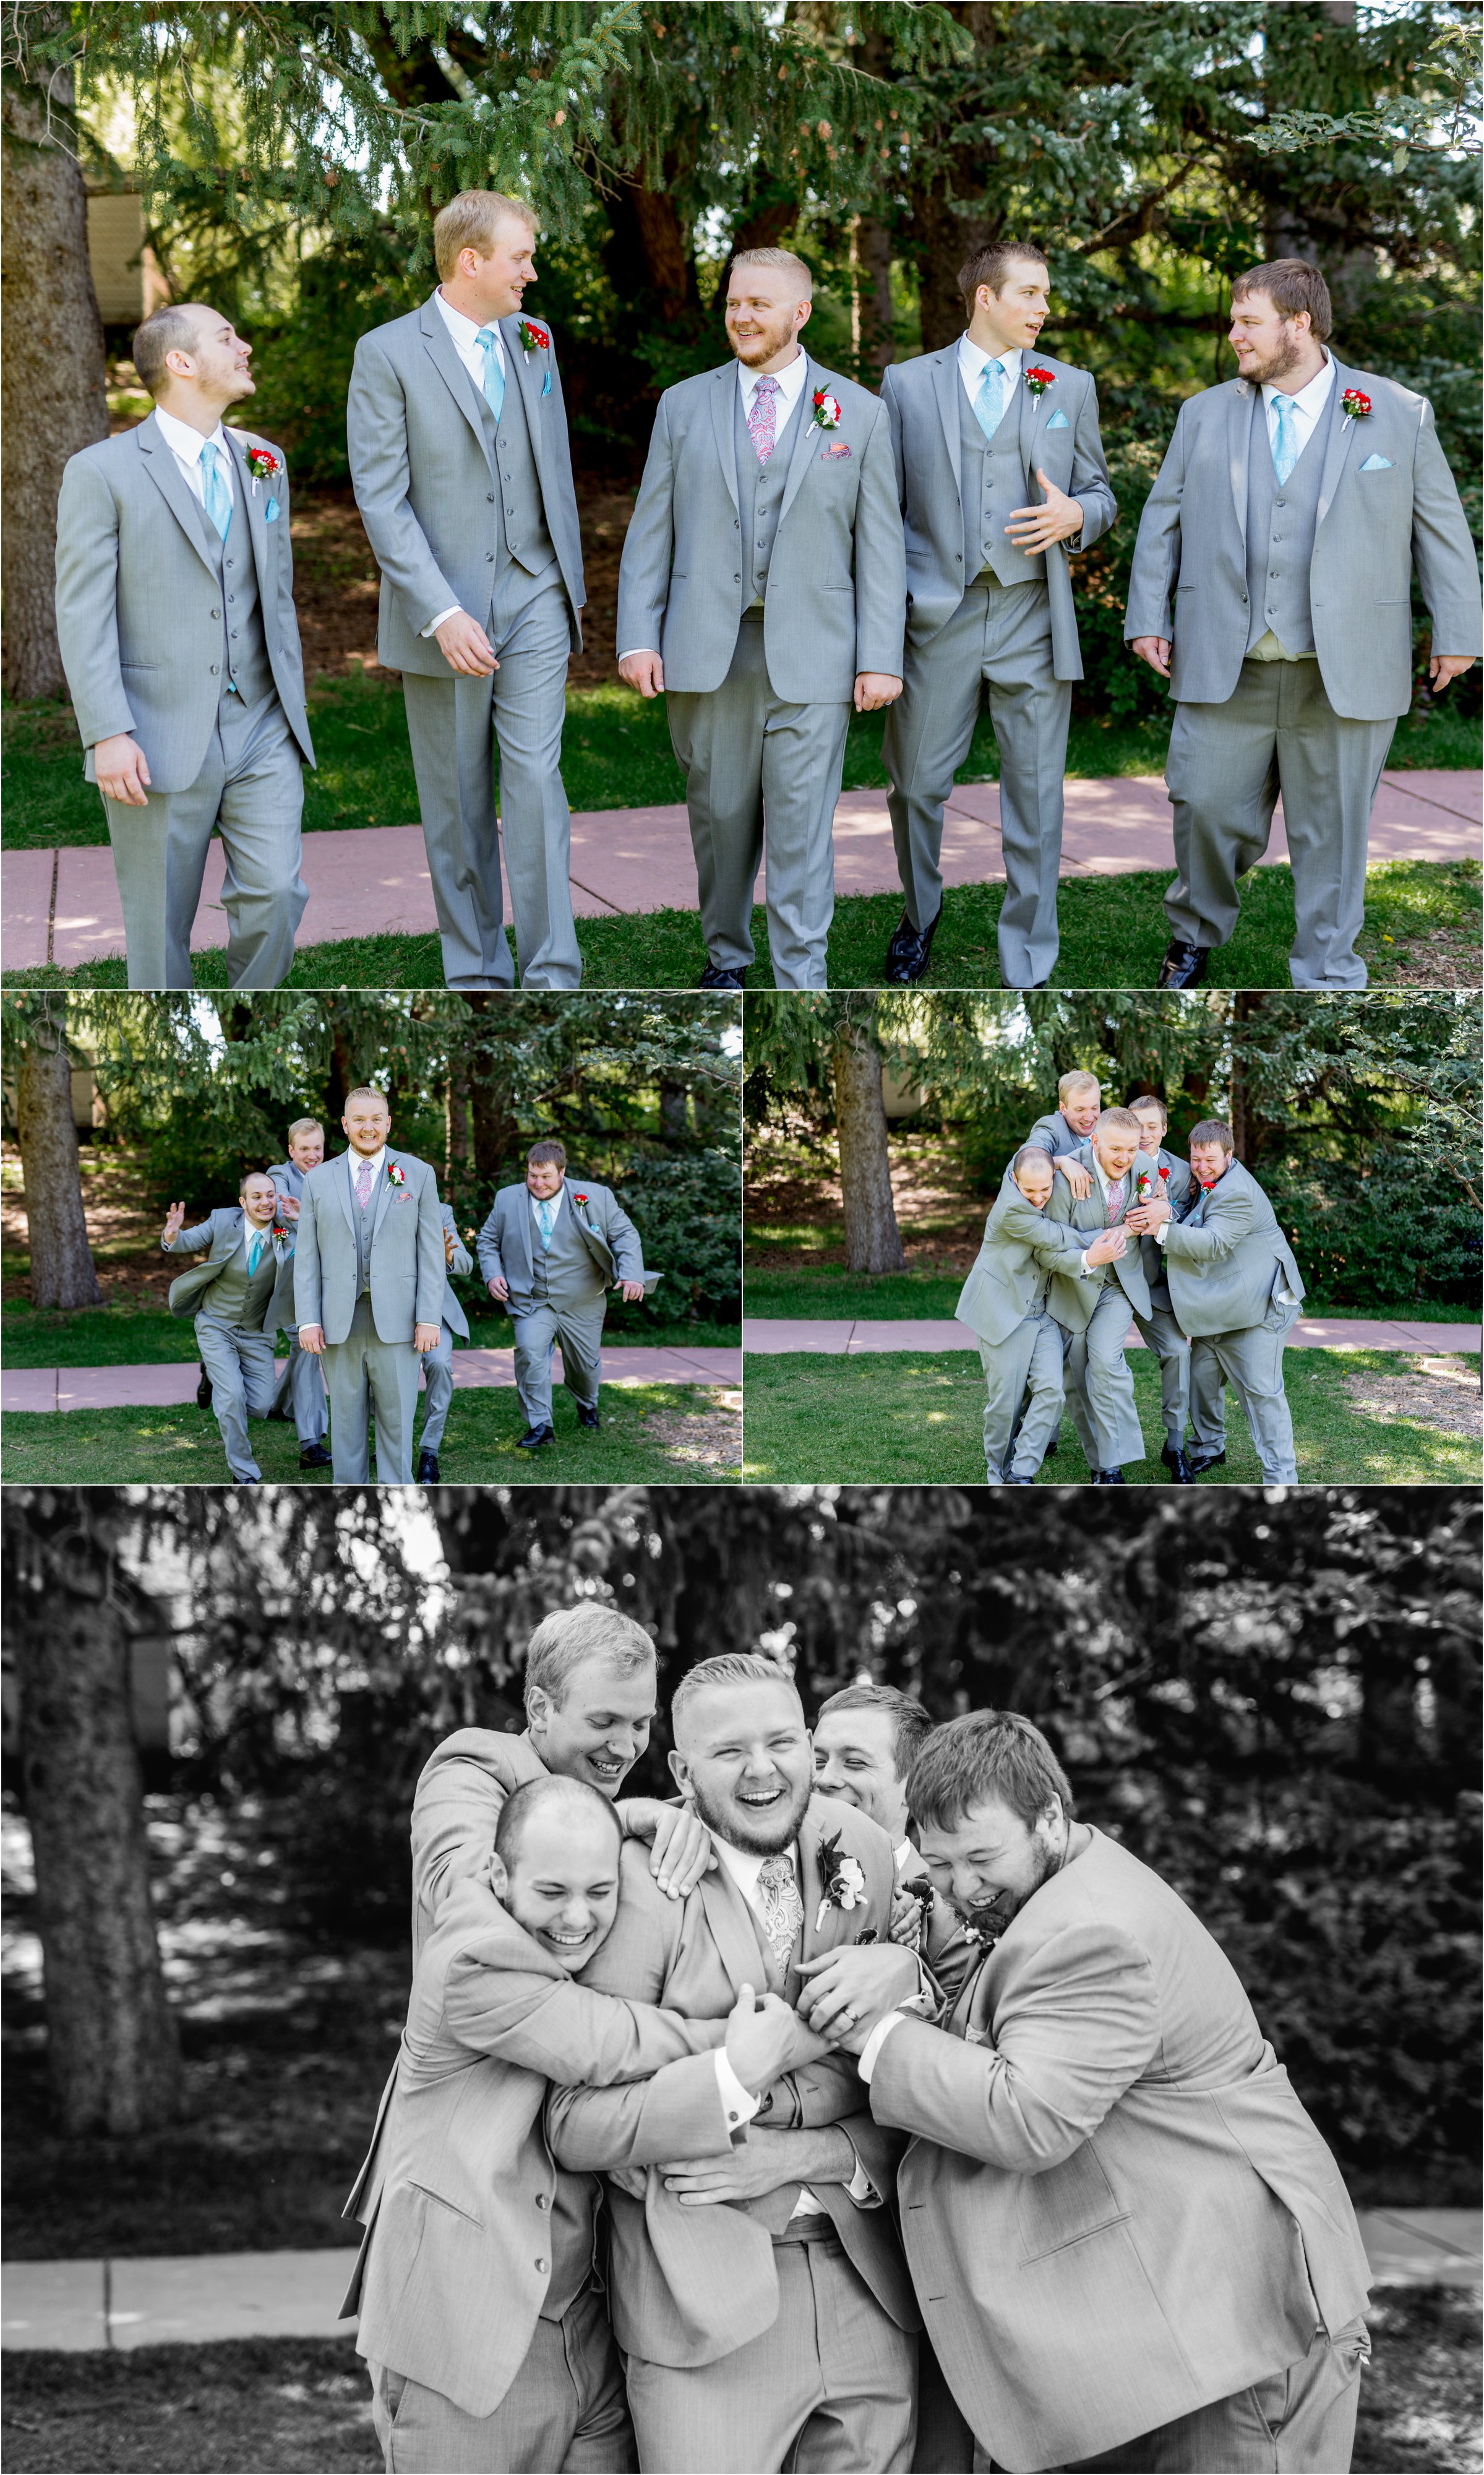 groom poses with his groomsmen in gray tuxedos with blue ties and red flowers